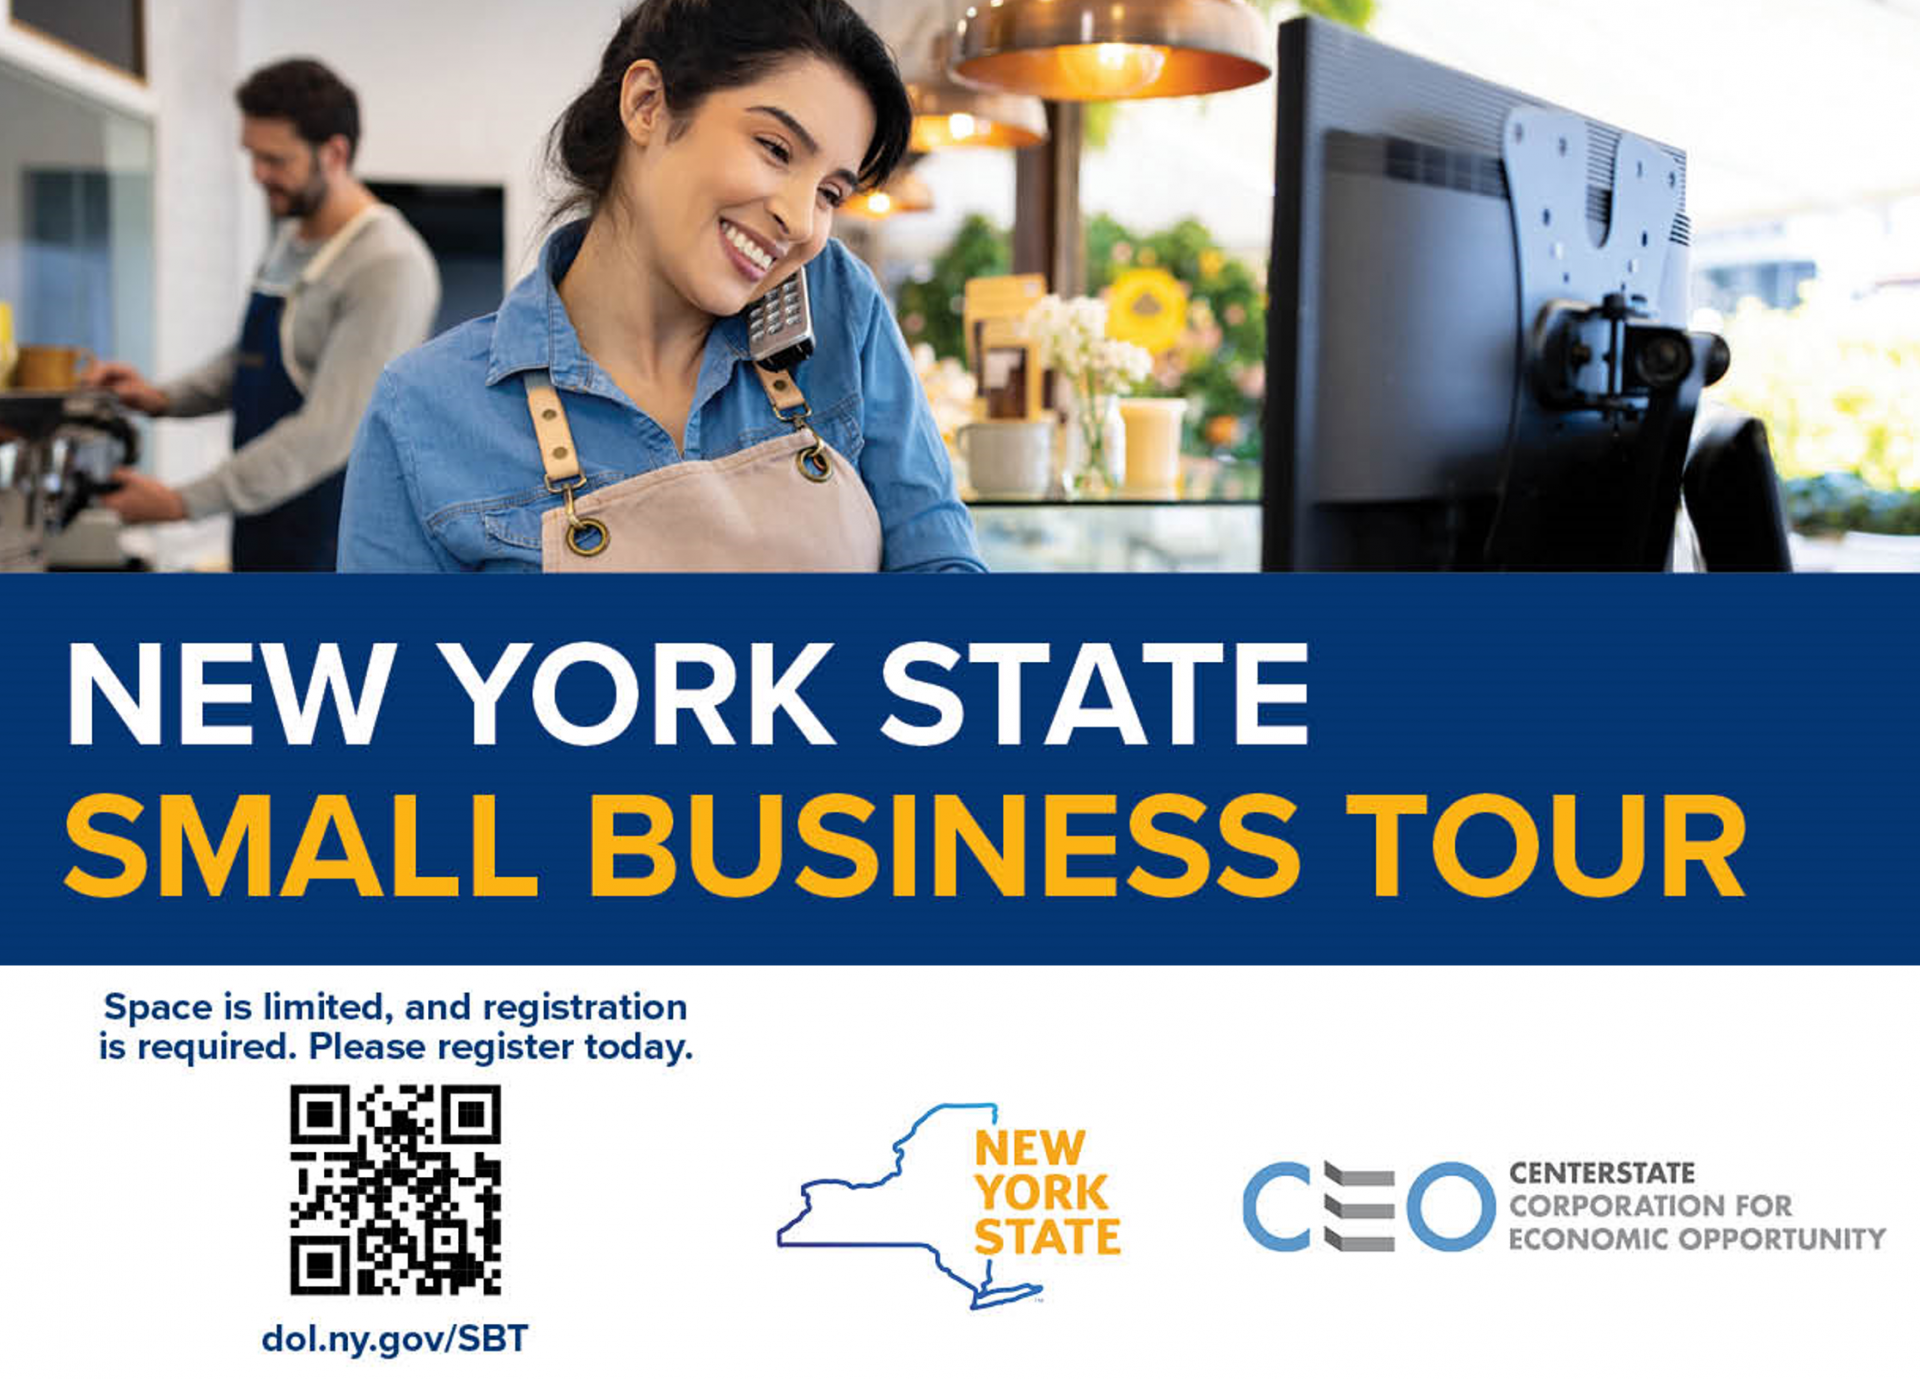 NYS Small Business Tour